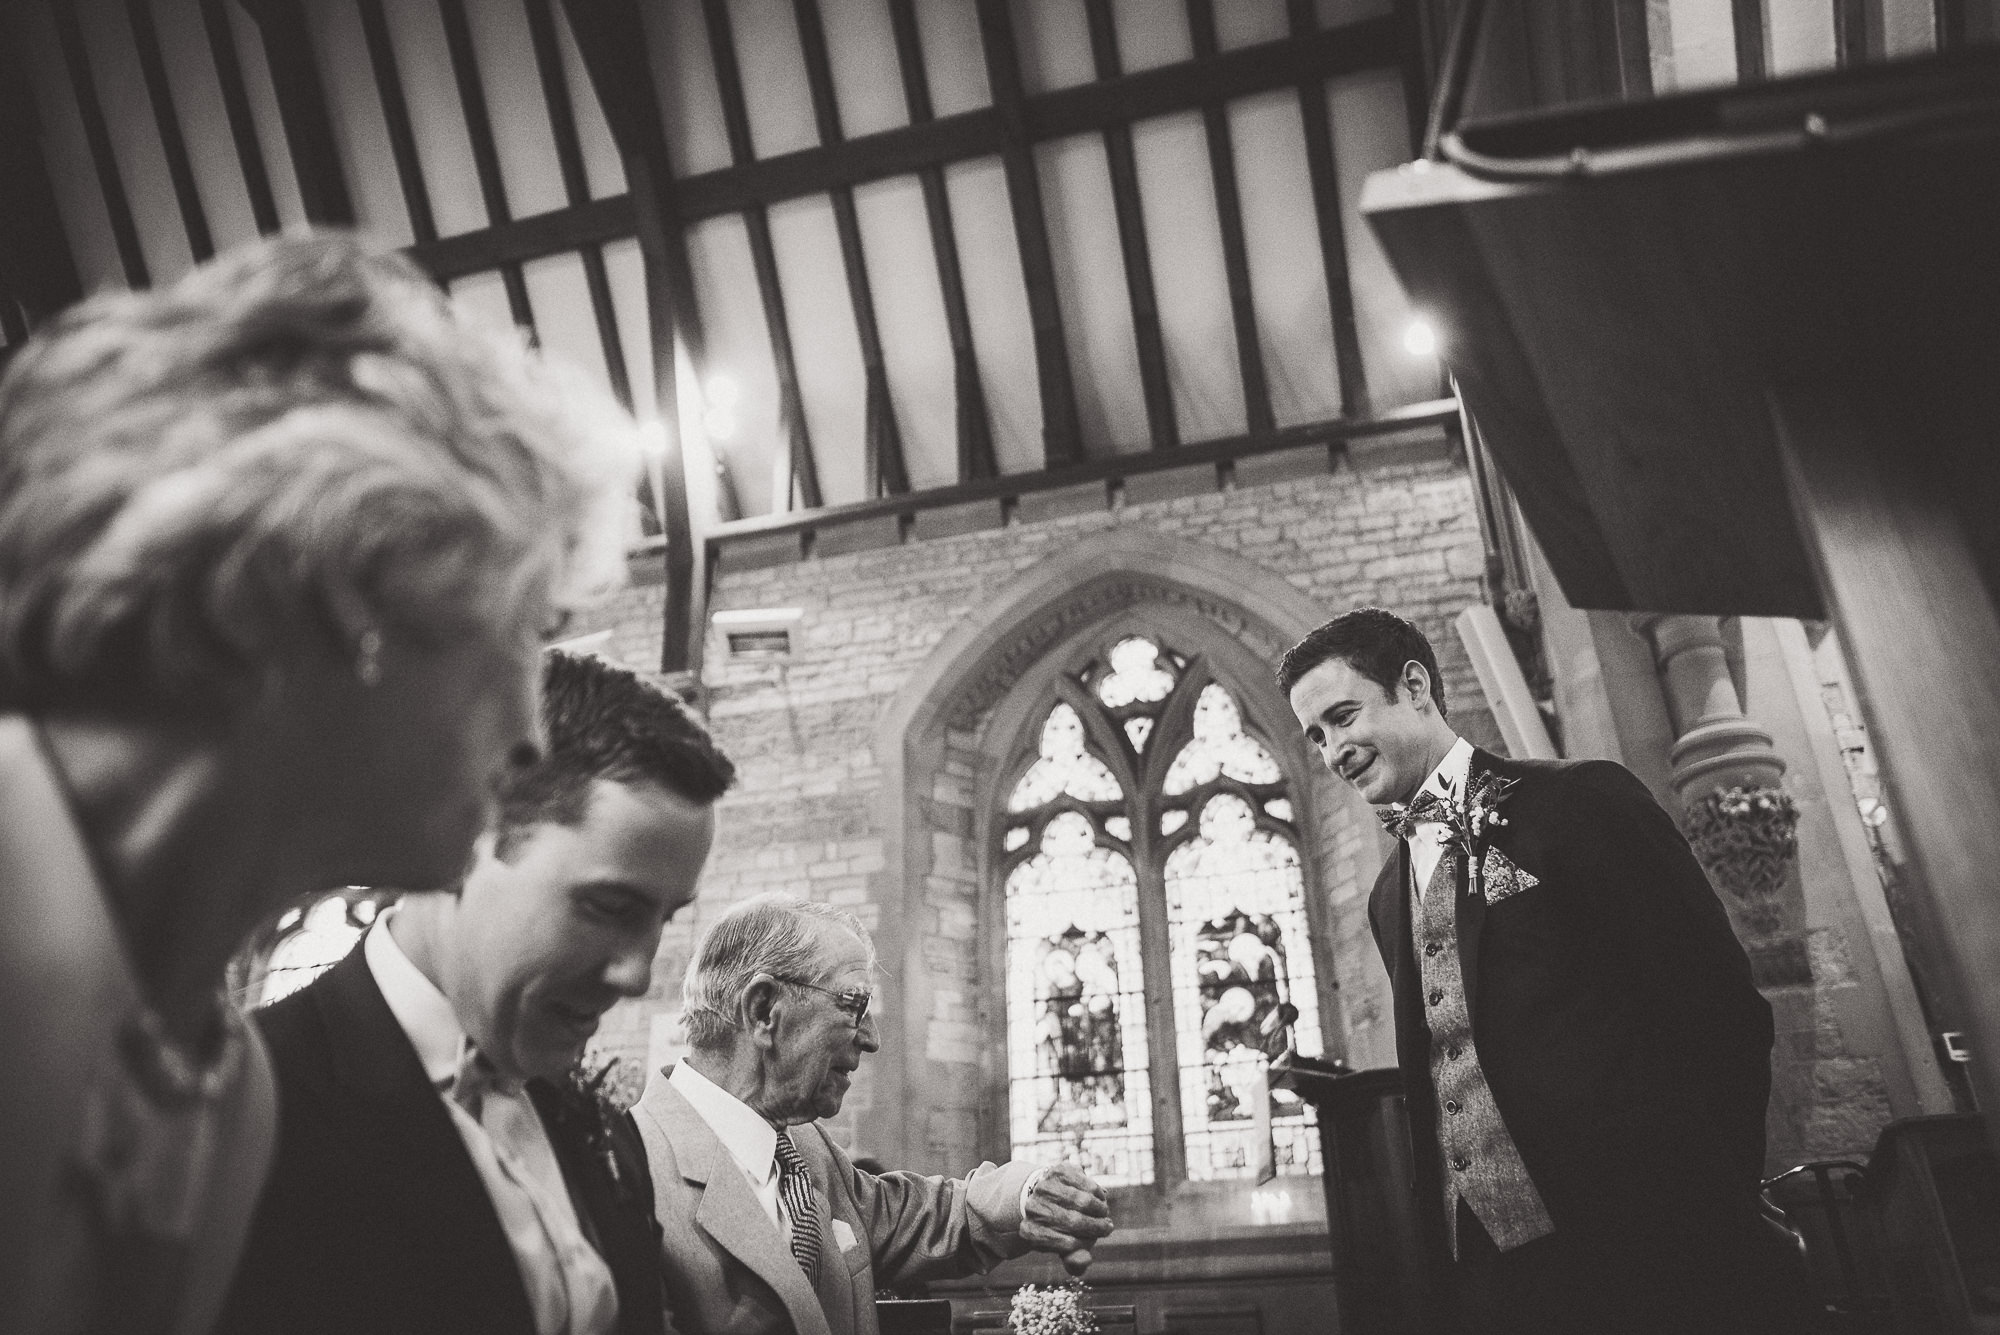 A wedding photographer captures a black and white photo of a bride and groom in a church.